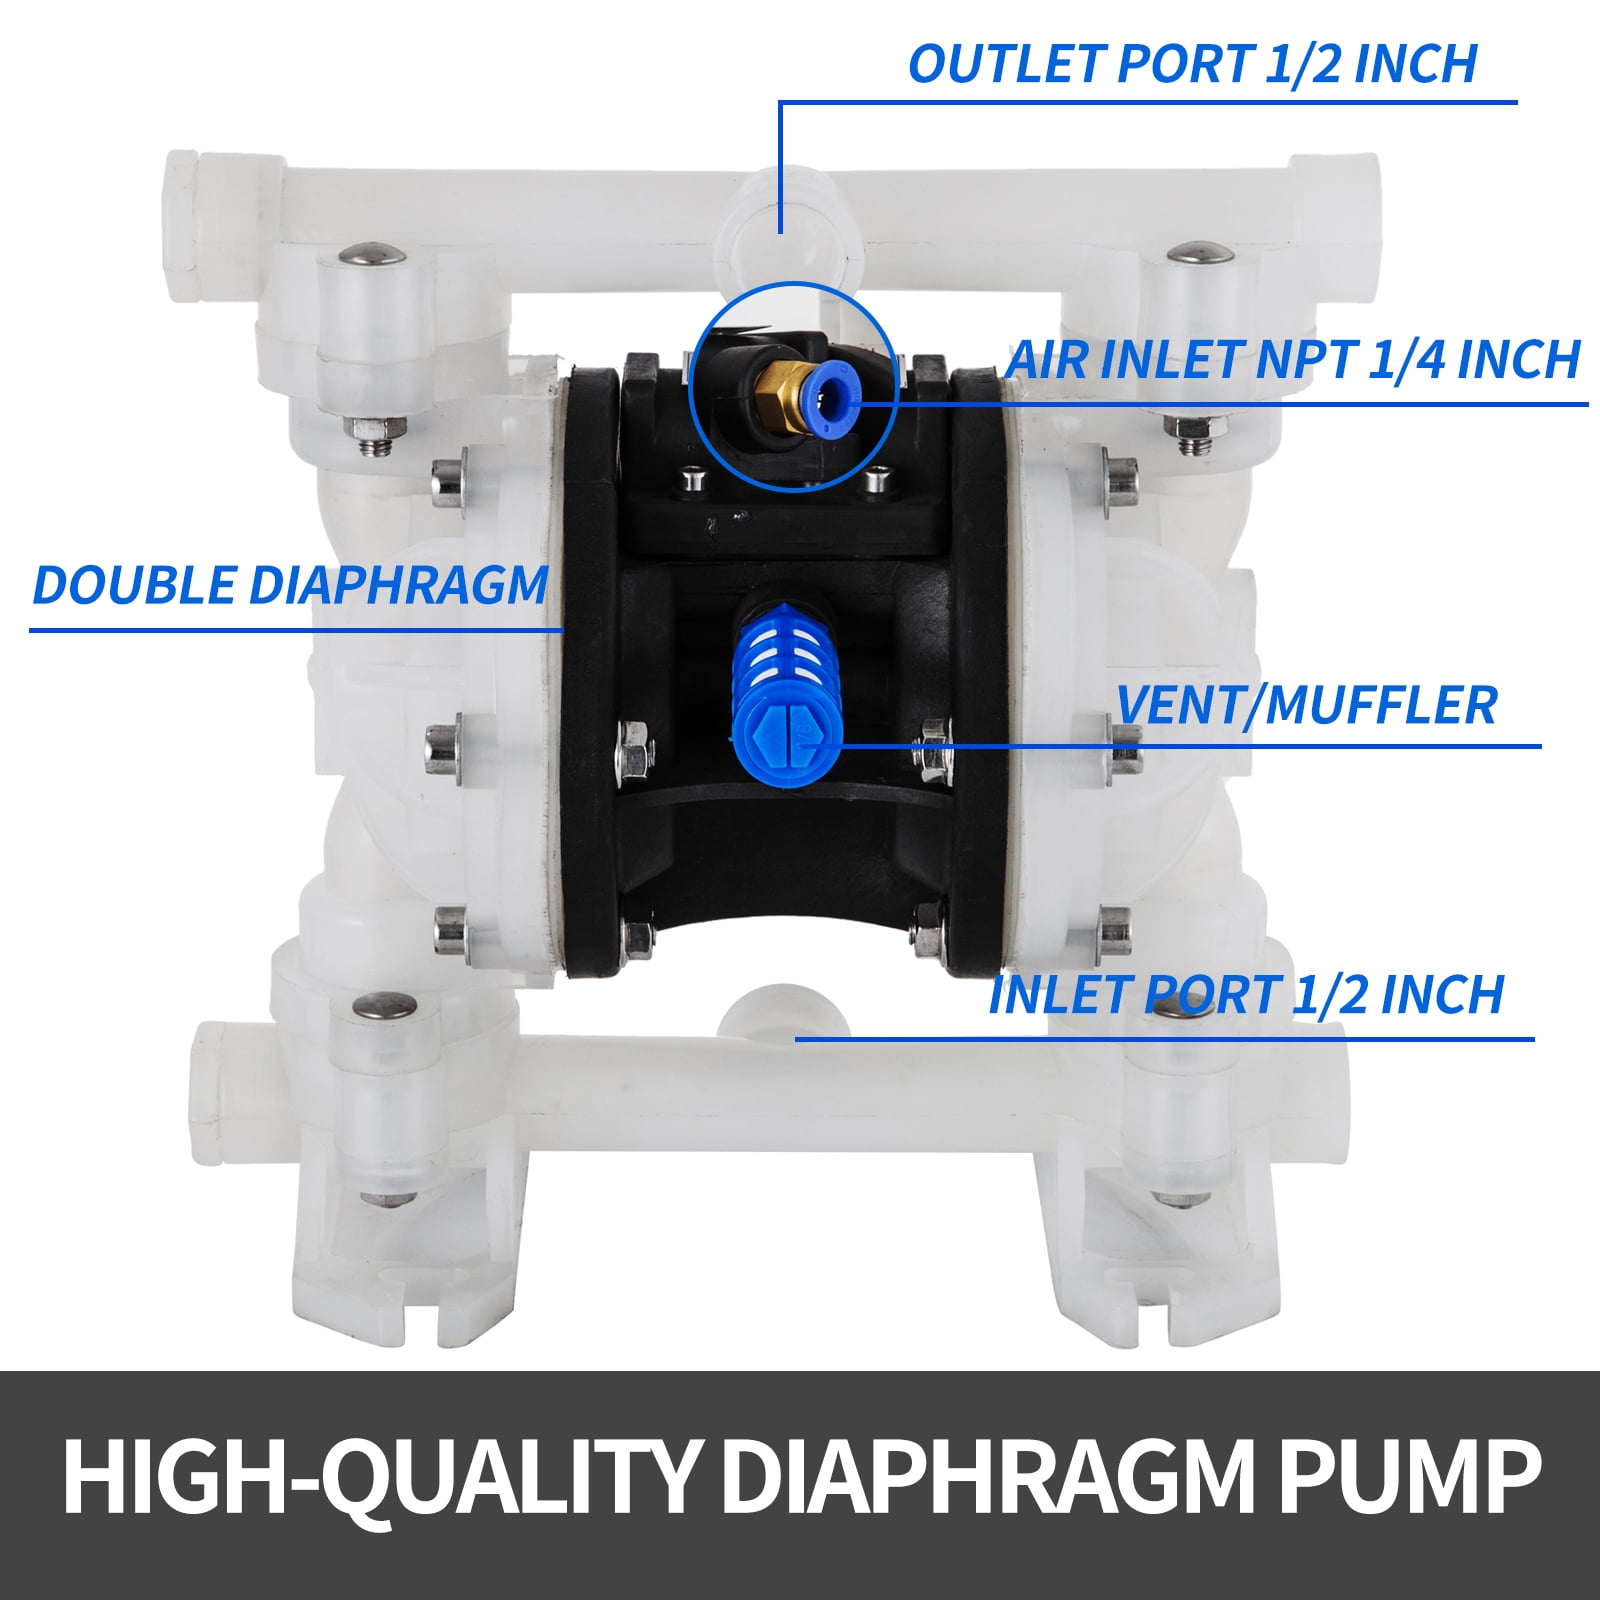 VEVOR Air-Operated Double Diaphragm Pump, 1/2 in Inlet & Outlet